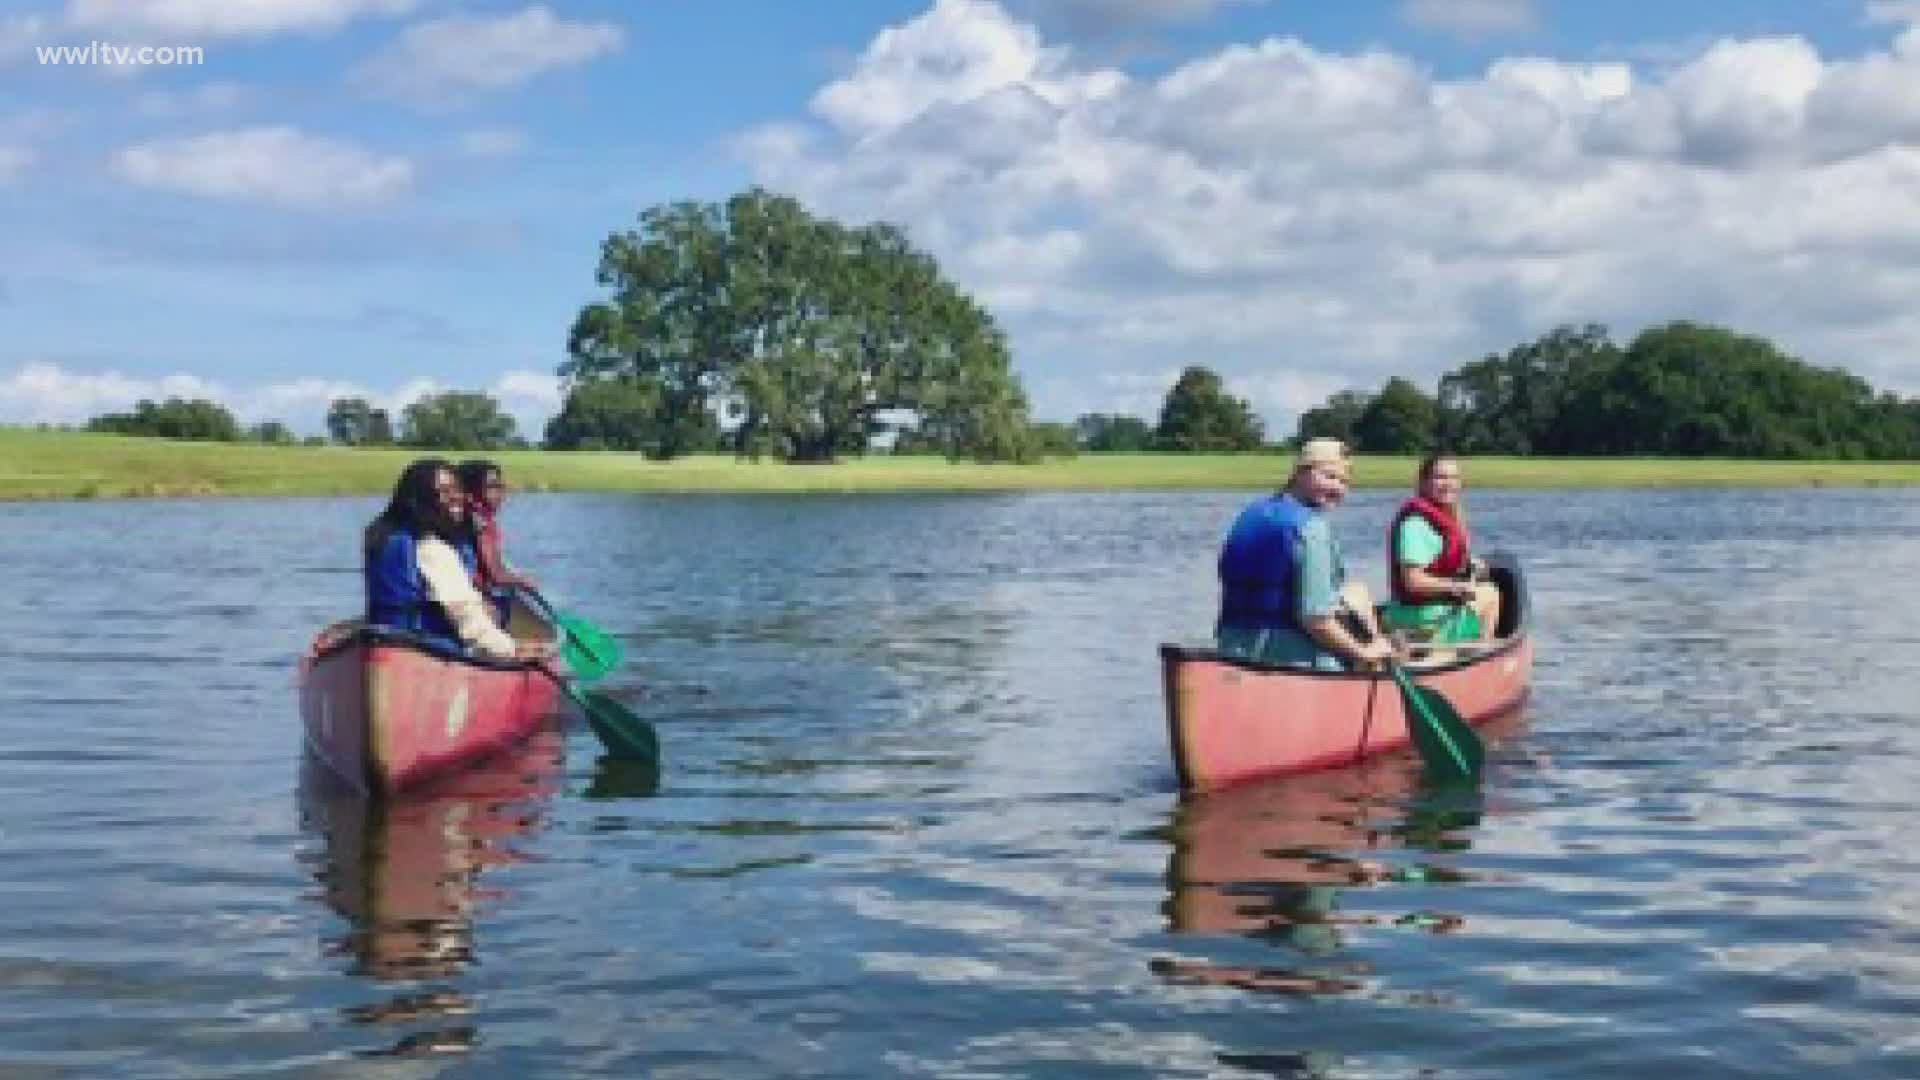 Jonathan Skvarka, Executive Director of LOOP NOLA, explains how canoe rentals in City Park provides young people with outdoor experiences, plus raises funds!